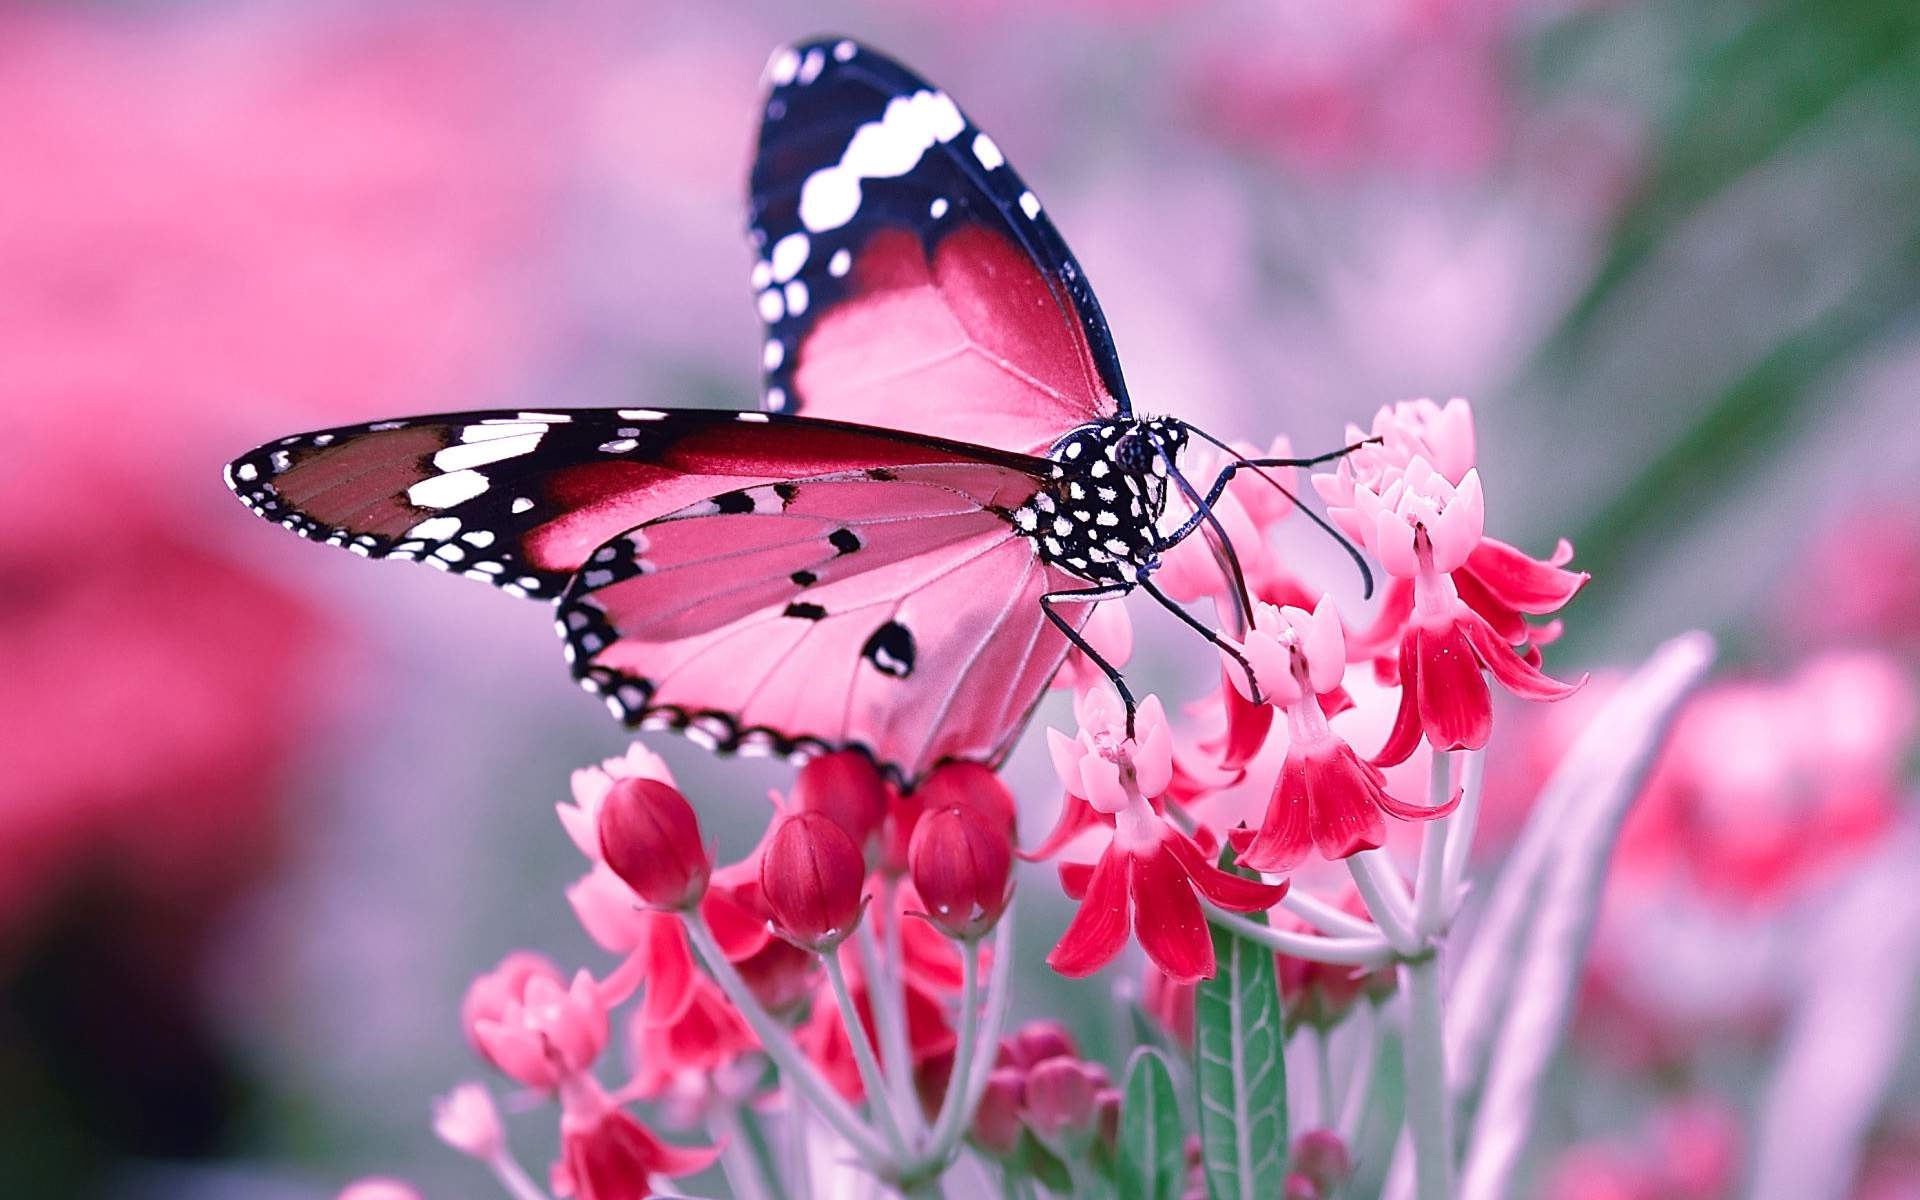 Pink and black butterfly on flowers | HD Wallpapers Rocks